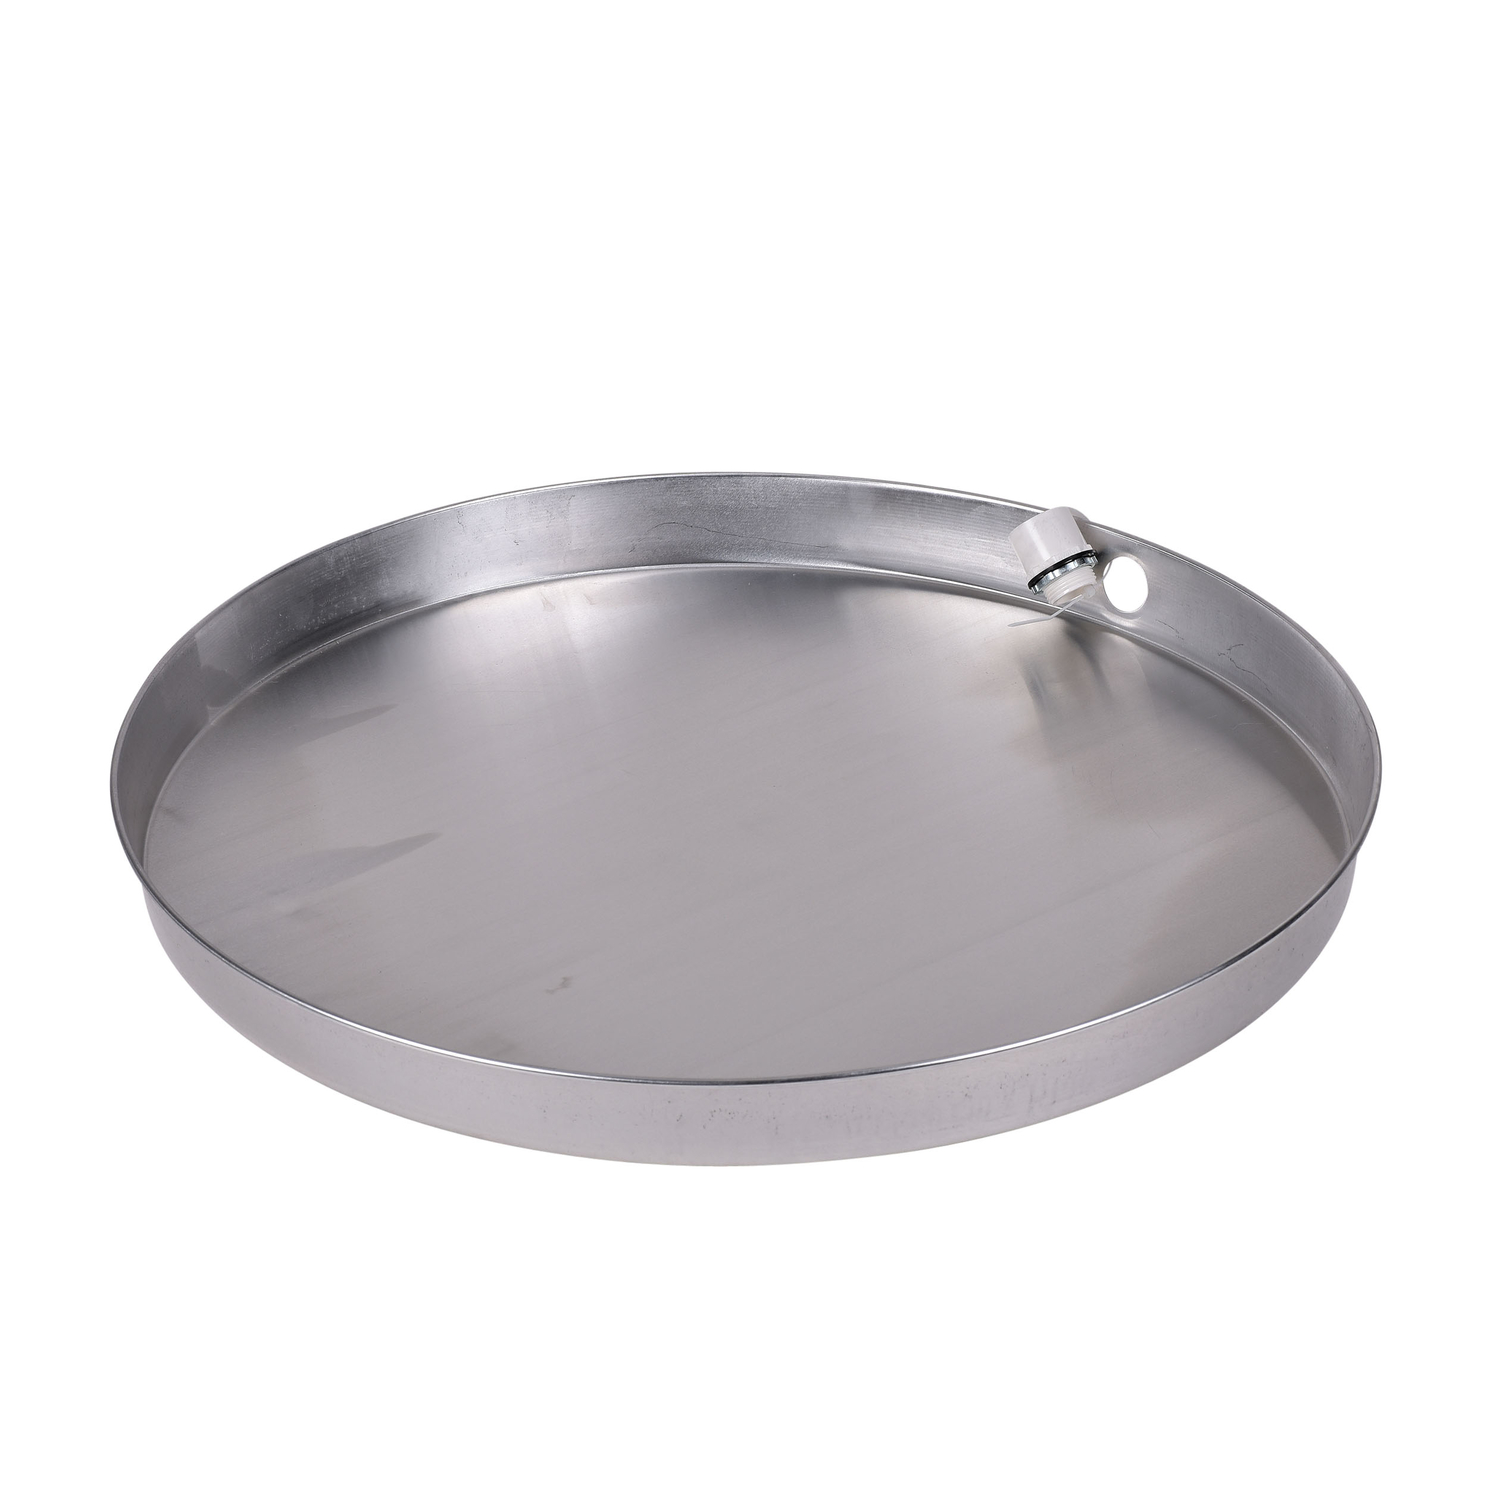 UPC 038753341545 product image for Oatey Aluminum Water Heater Pan | upcitemdb.com